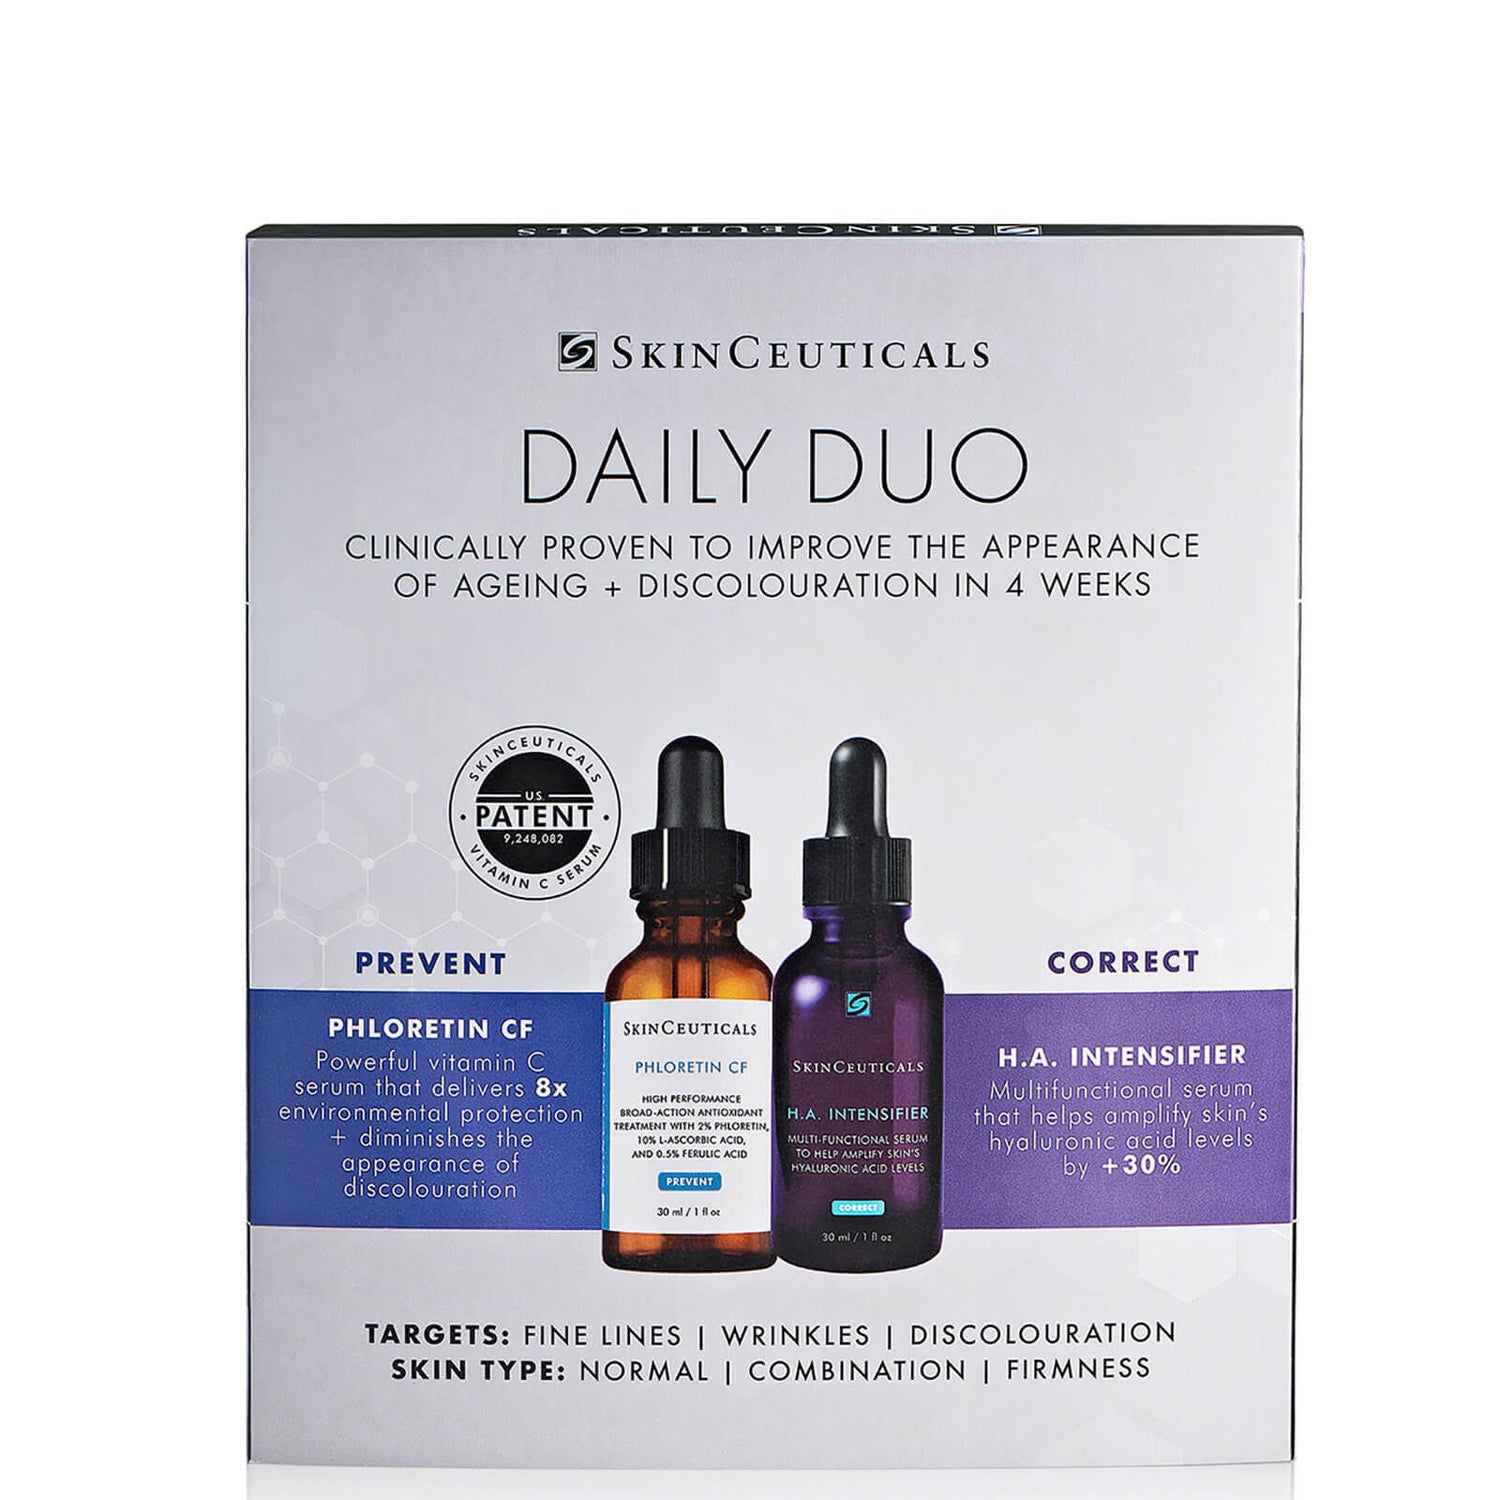 SkinCeuticals Daily Duo Phloretin + H.A Intensifier for Normal, Combination and Discolouration-Prone Skin (Worth £240.00)